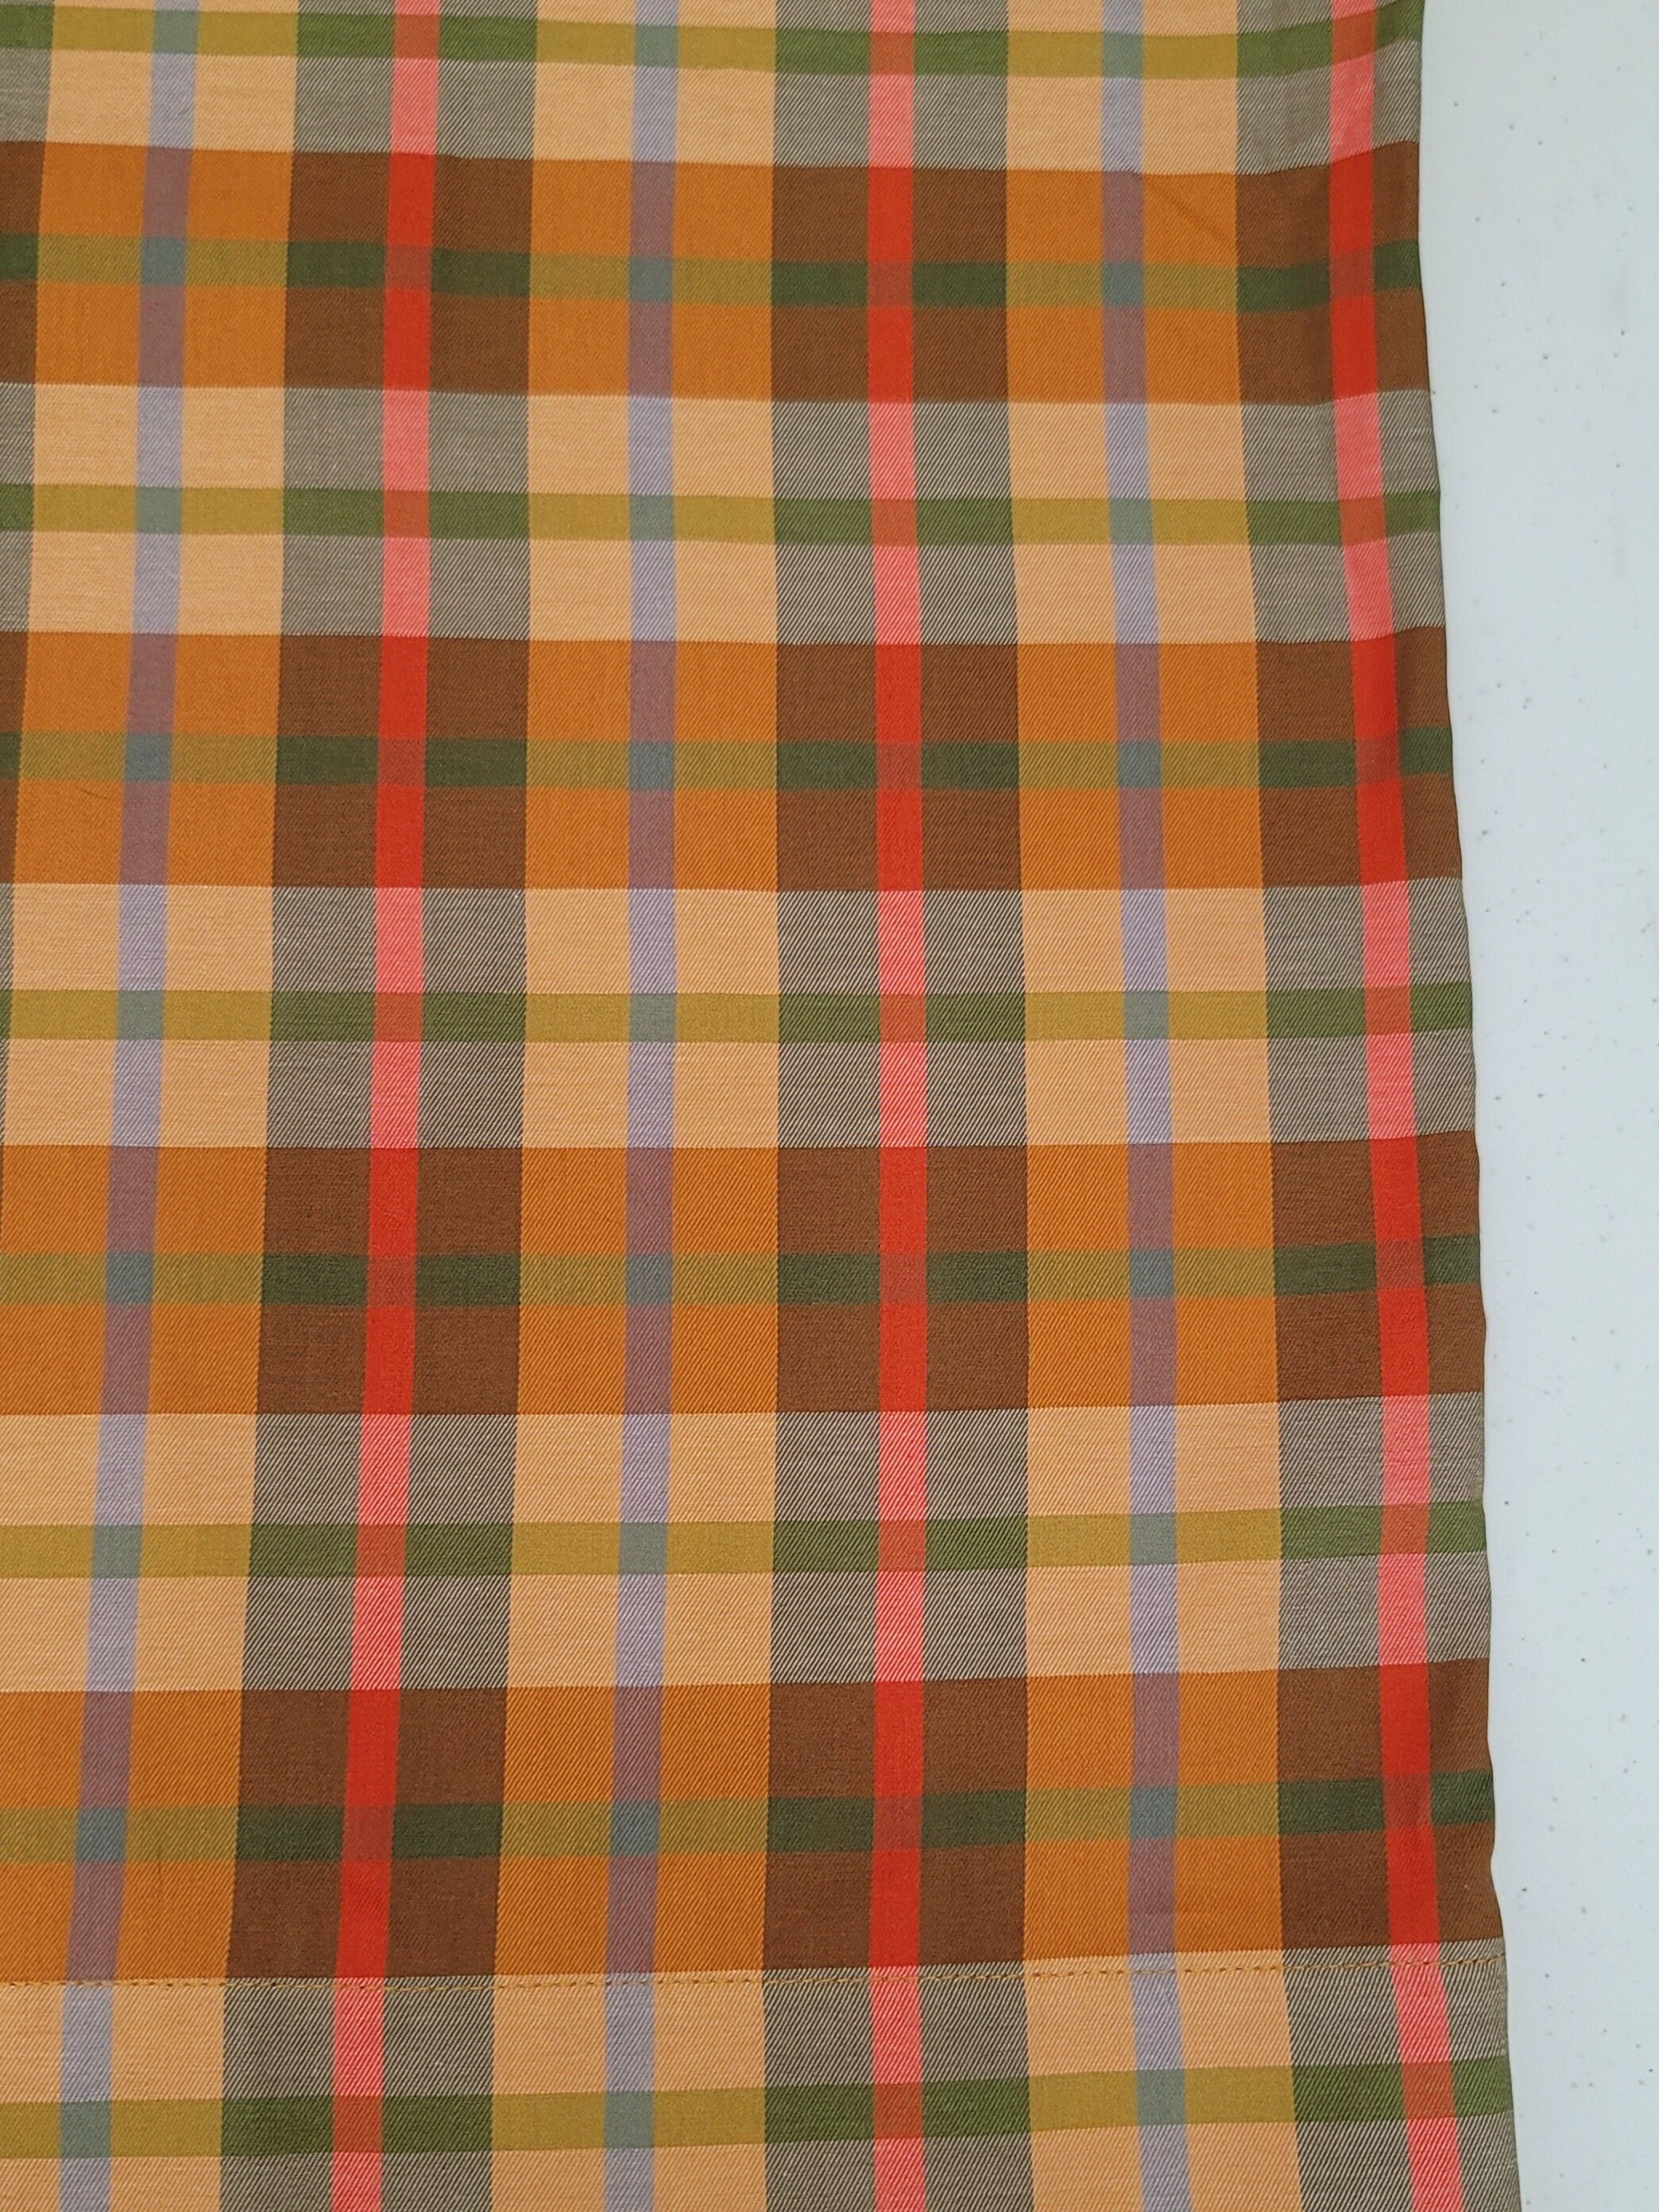 Cotton Flannel Stitched Patchwork Plaid Squares in Red Navy Orange Brown  White 42 Wide Cotton Flannel Fabric by The Yard (D270.10)